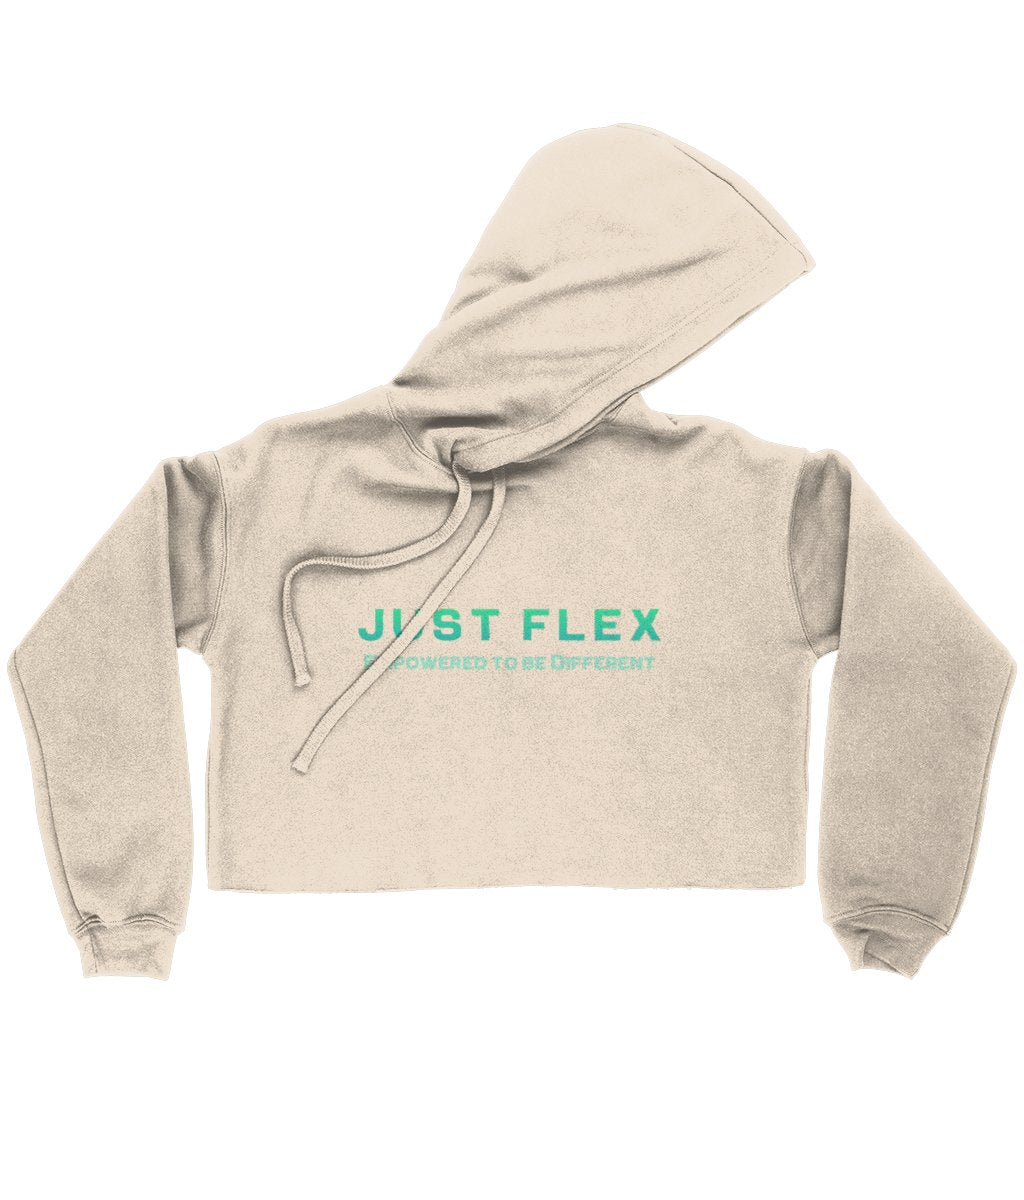 Just Flex - Empowered To Be Different Cropped Hoodie - Just Flex